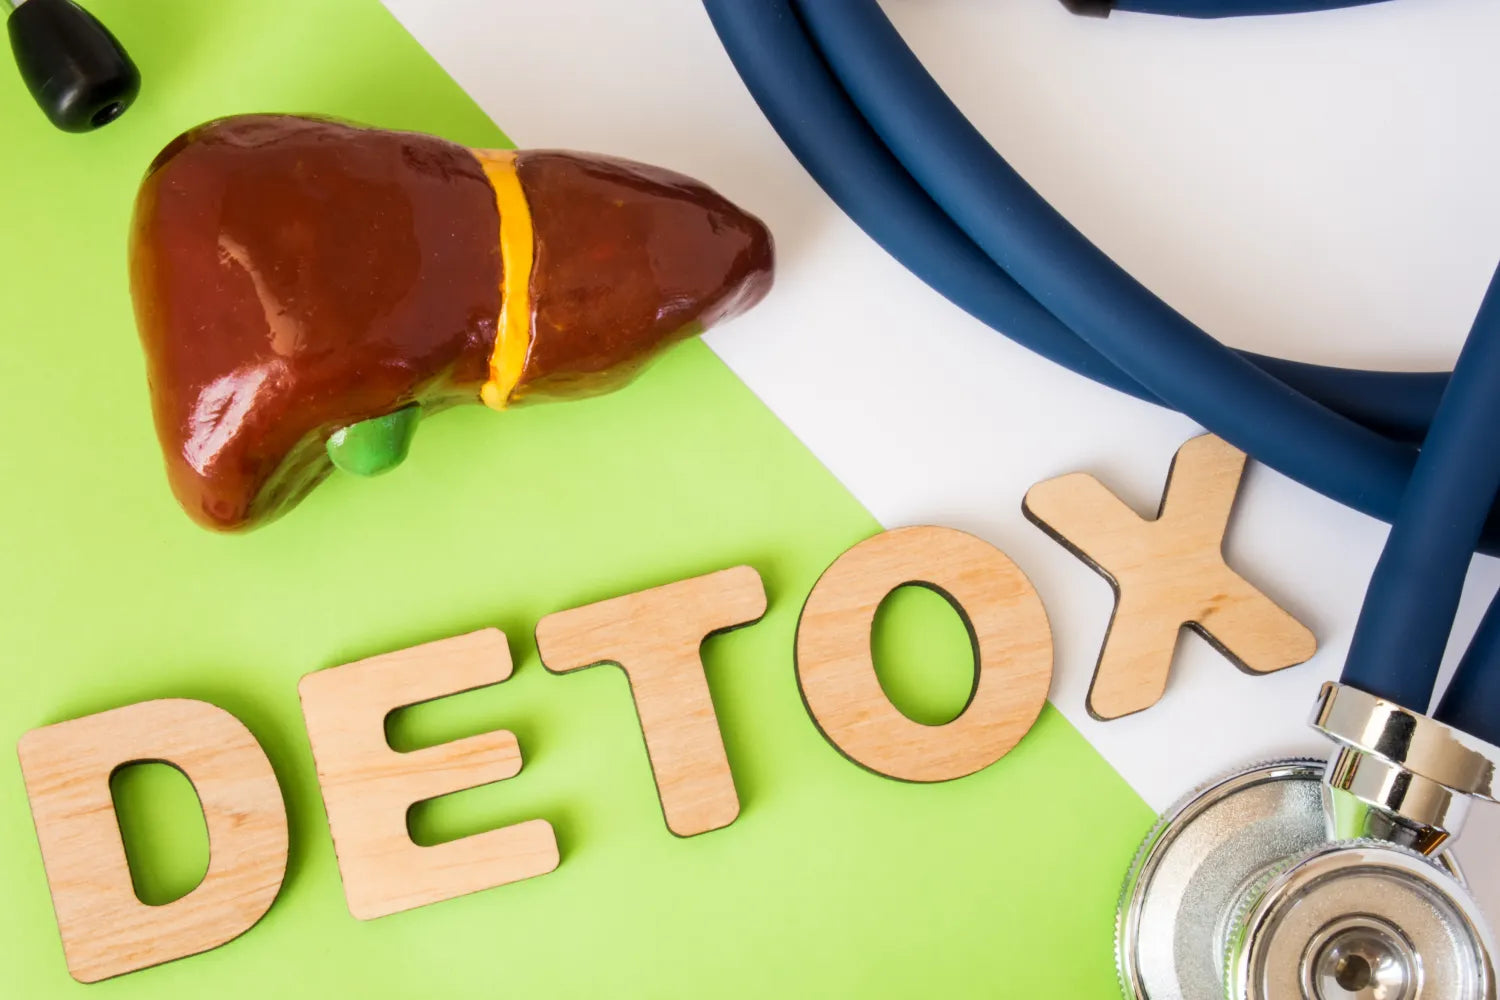 How To Detox Your Liver: The Ultimate Guide